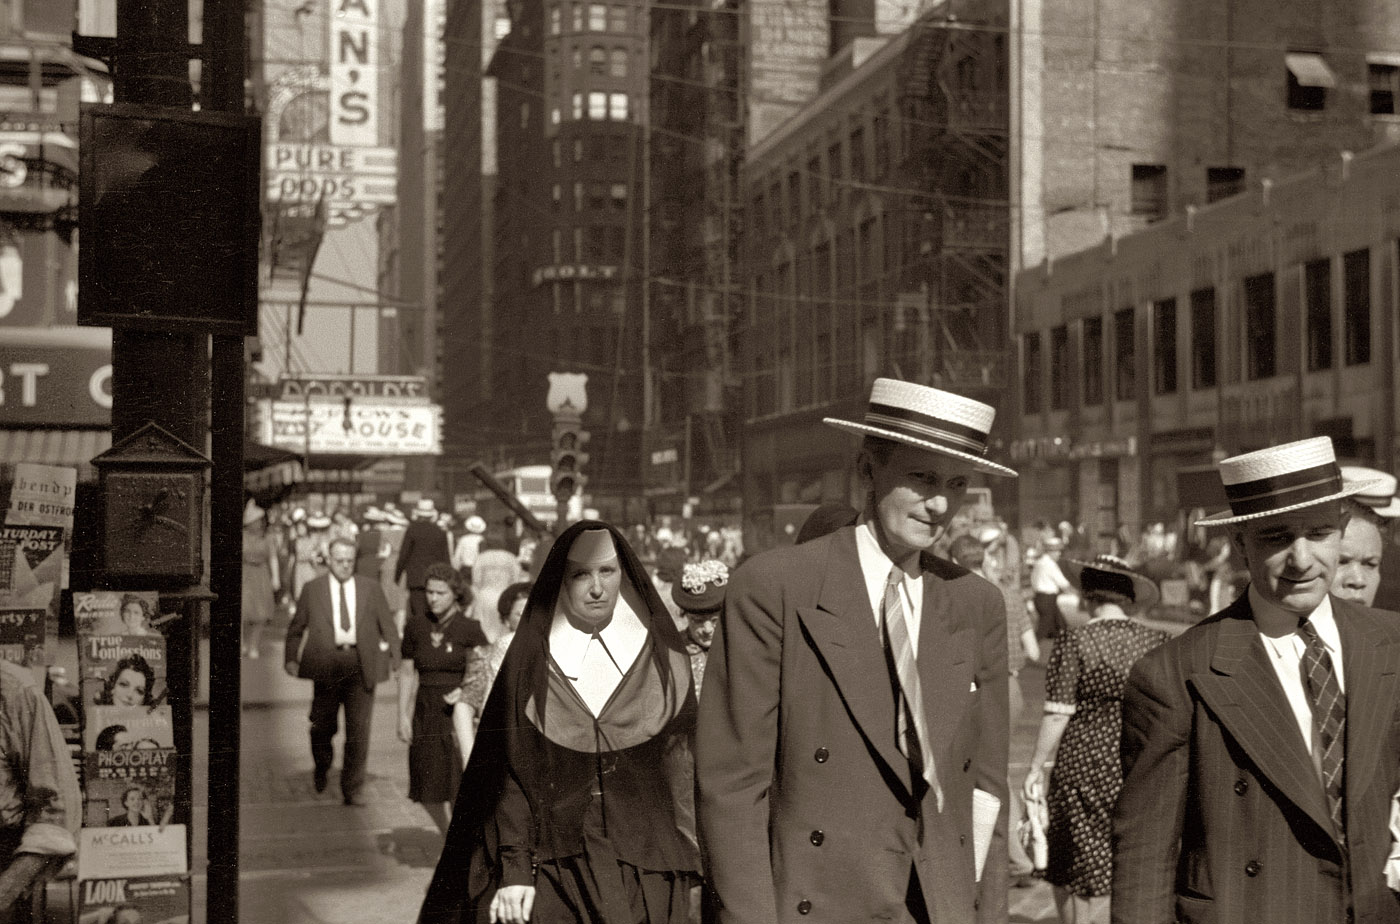 July 1941. Street scene in Chicago on Washington at Dearborn. 35mm nitrate negative by John Vachon for the FSA. View full size | Another view.